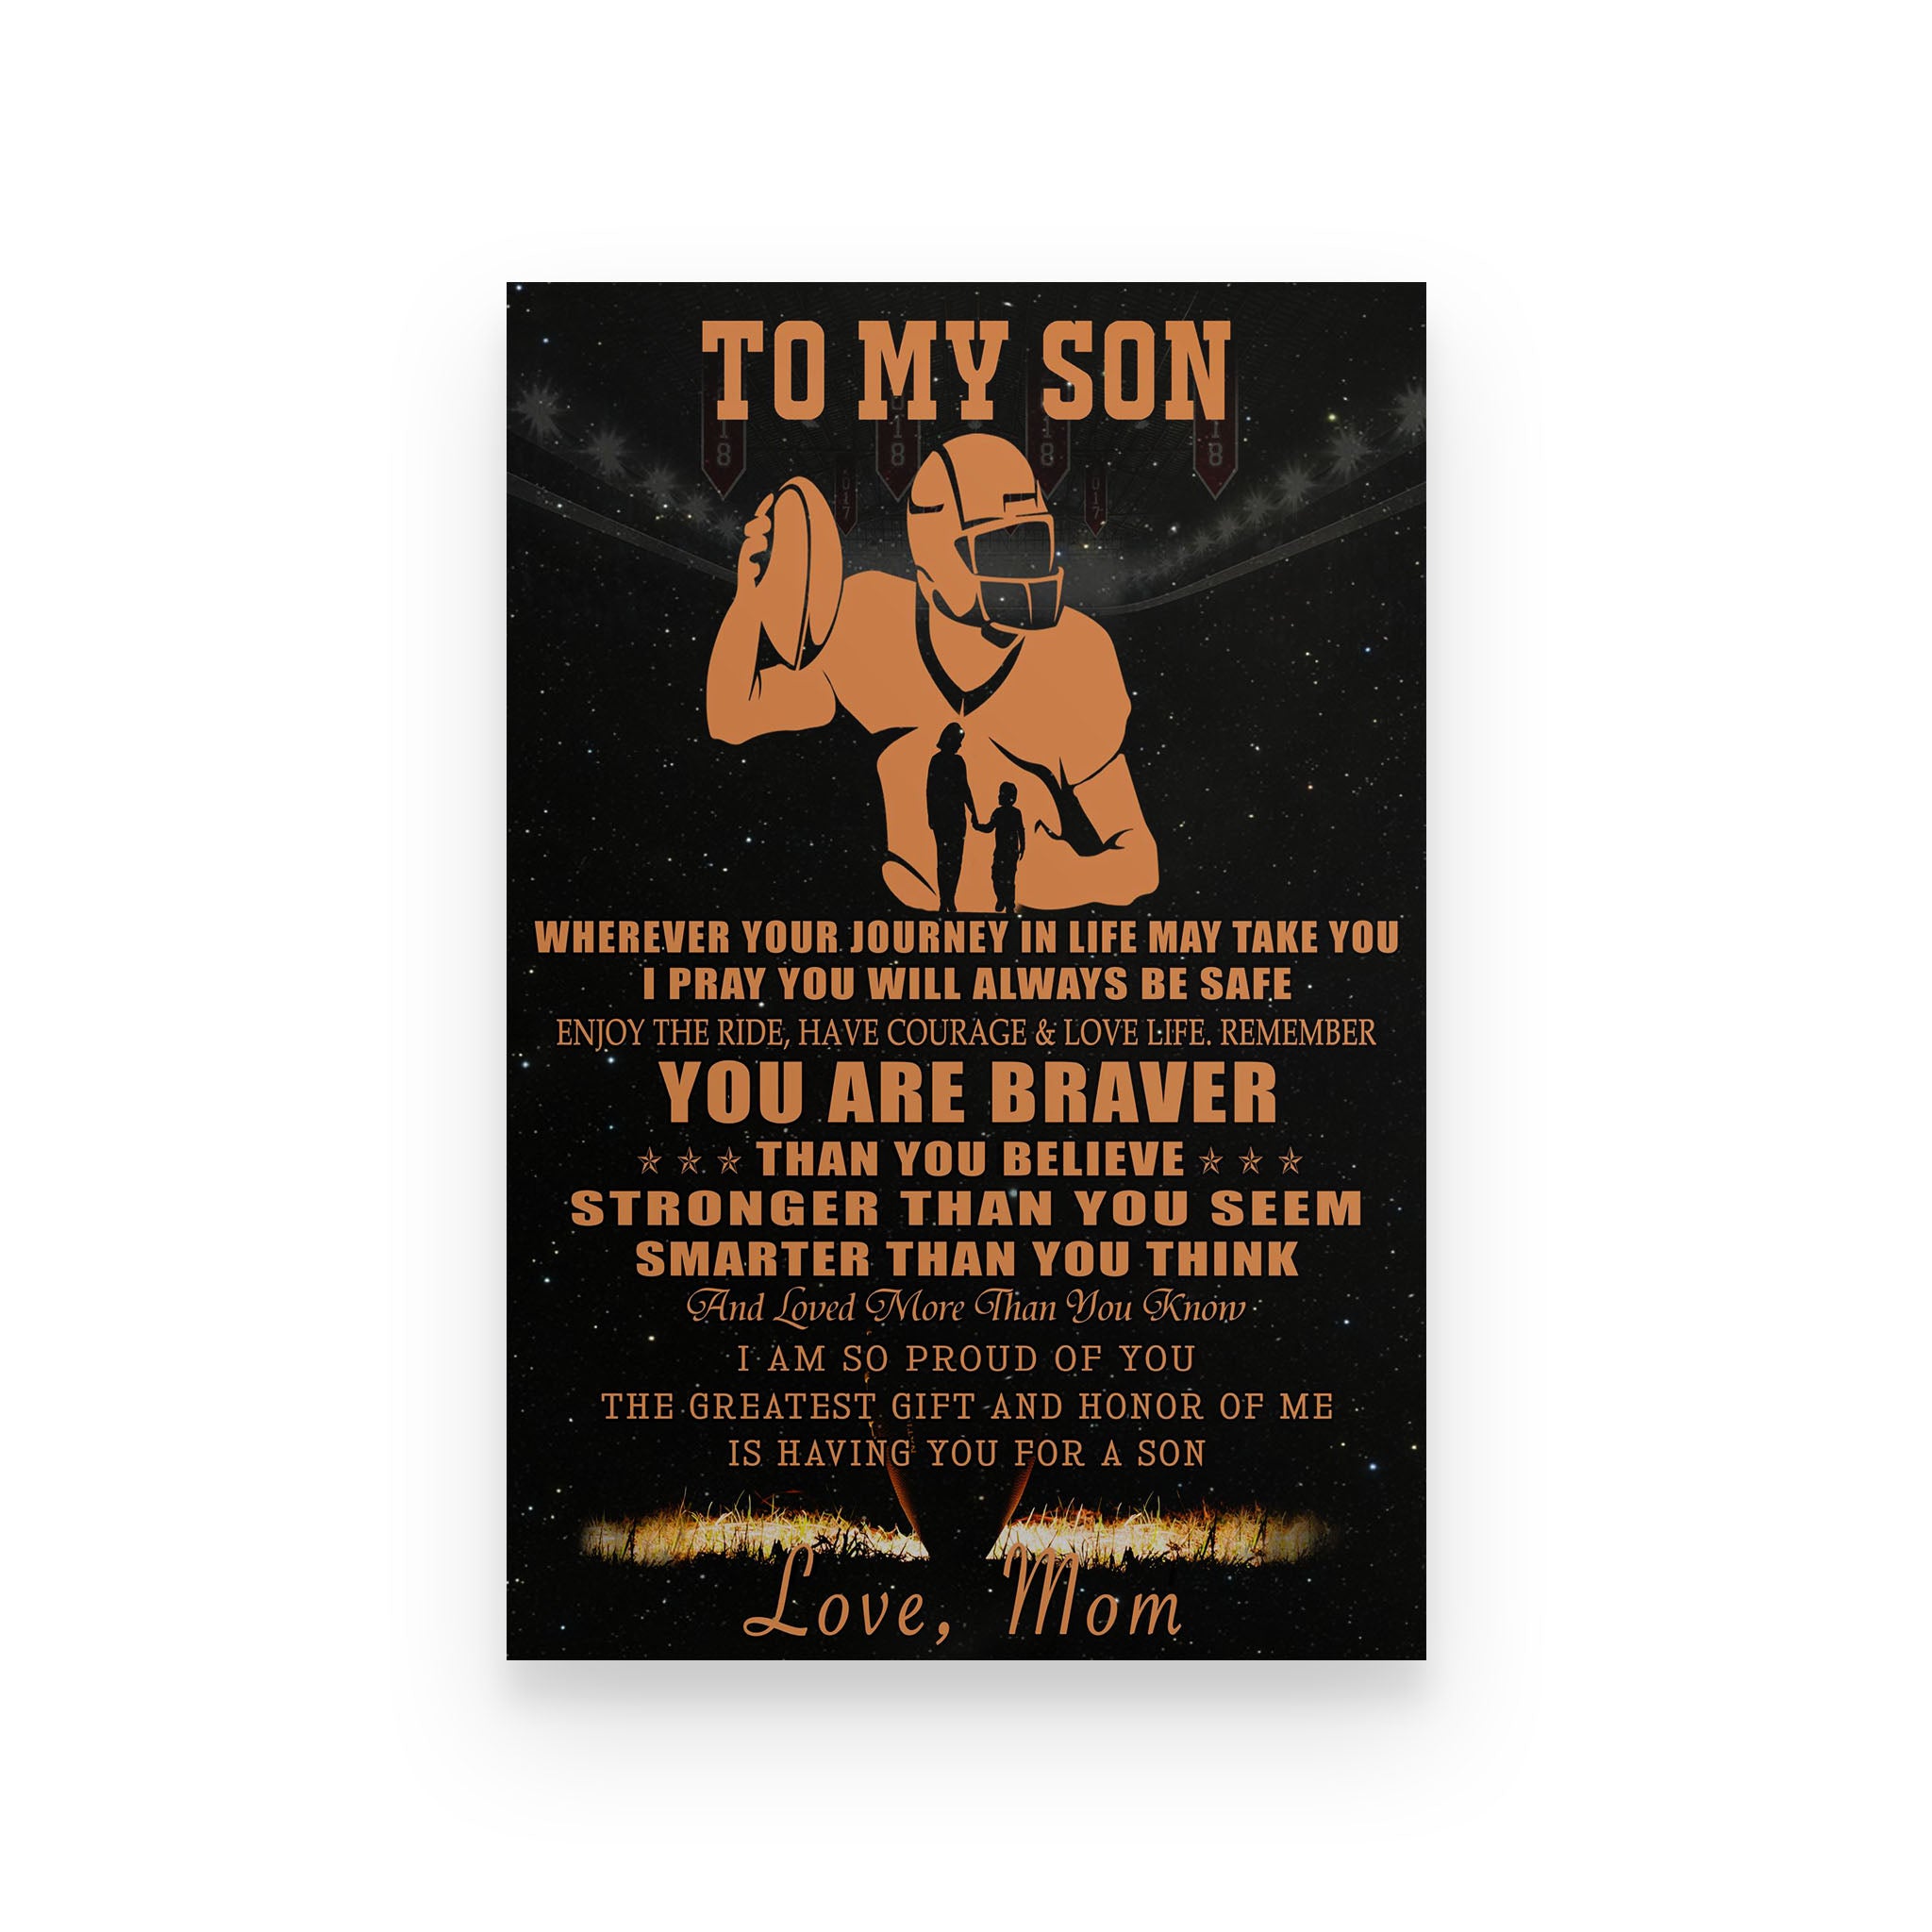 American football poster mom to son Wherever your journey in life may take you